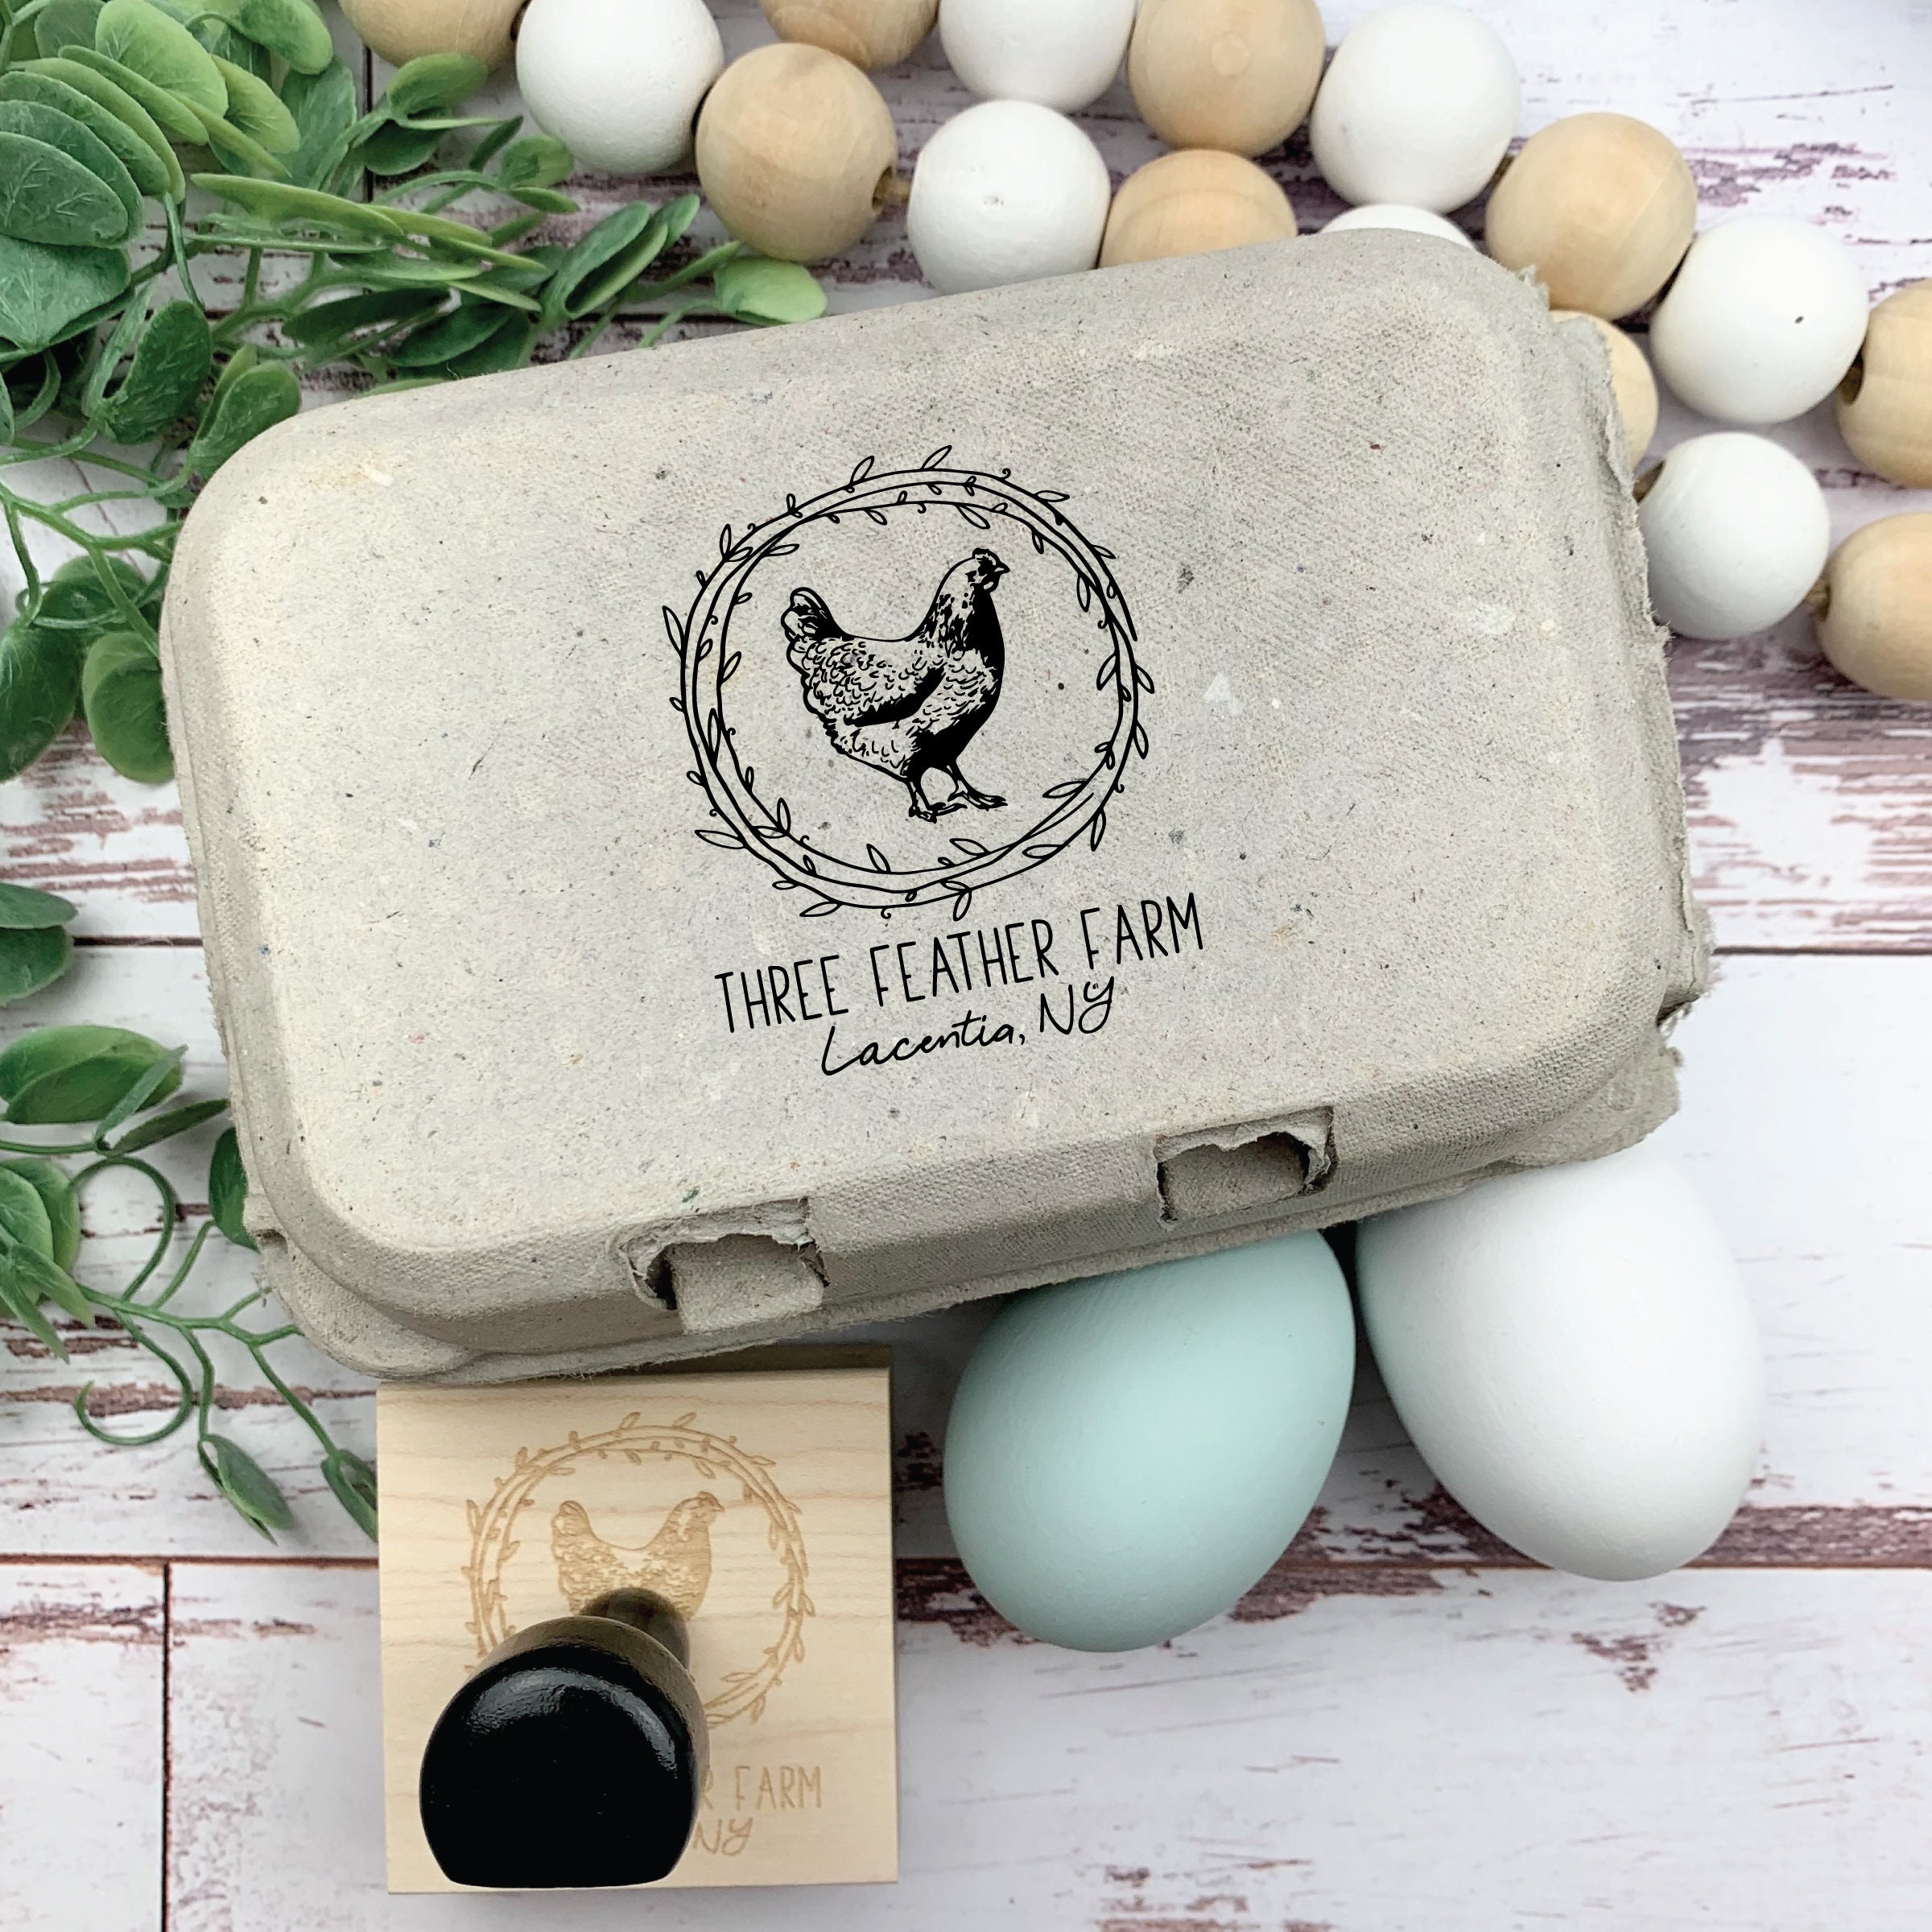 CHYHMYT | Egg Cartons Stamp | Personalized Eggs Carton Stamps | Chicken Eggs Stamper | Custom Wooden Rubber Stamp | Farm Stampers (3x3 Inches)